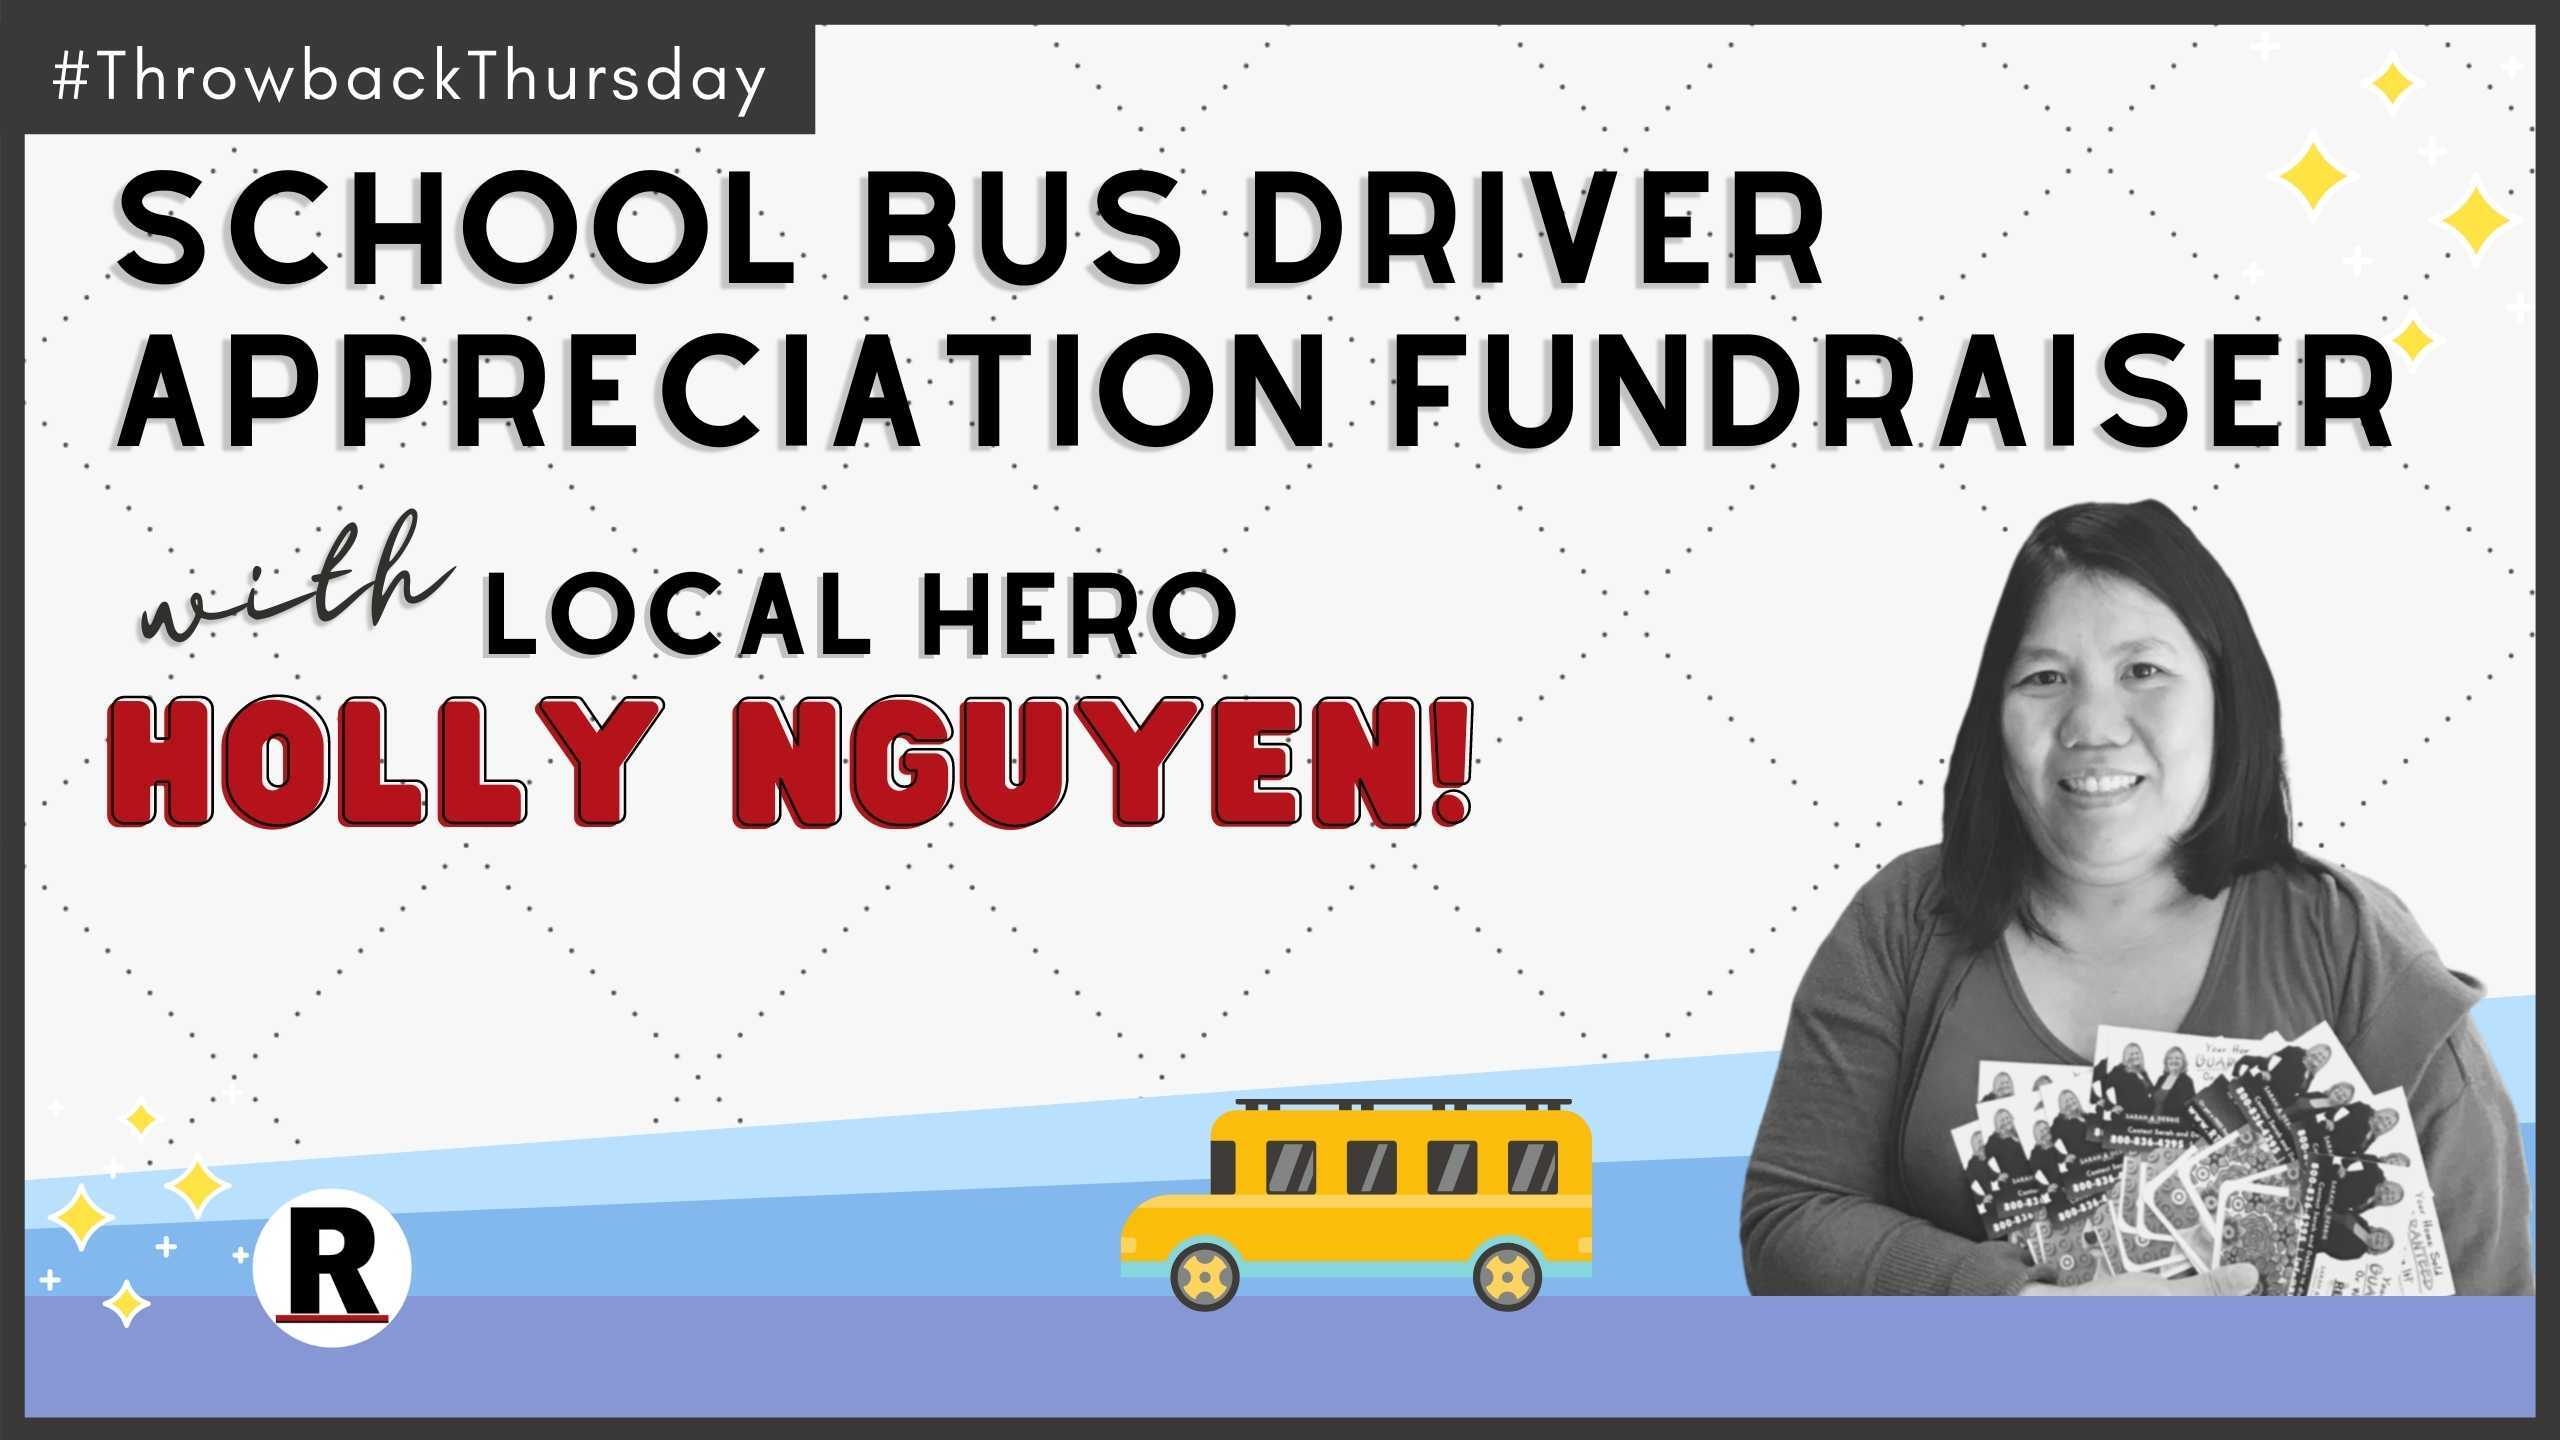 #ThrowbackThursday To The School Bus Driver Appreciation Fundraiser With Holly Nguyen!